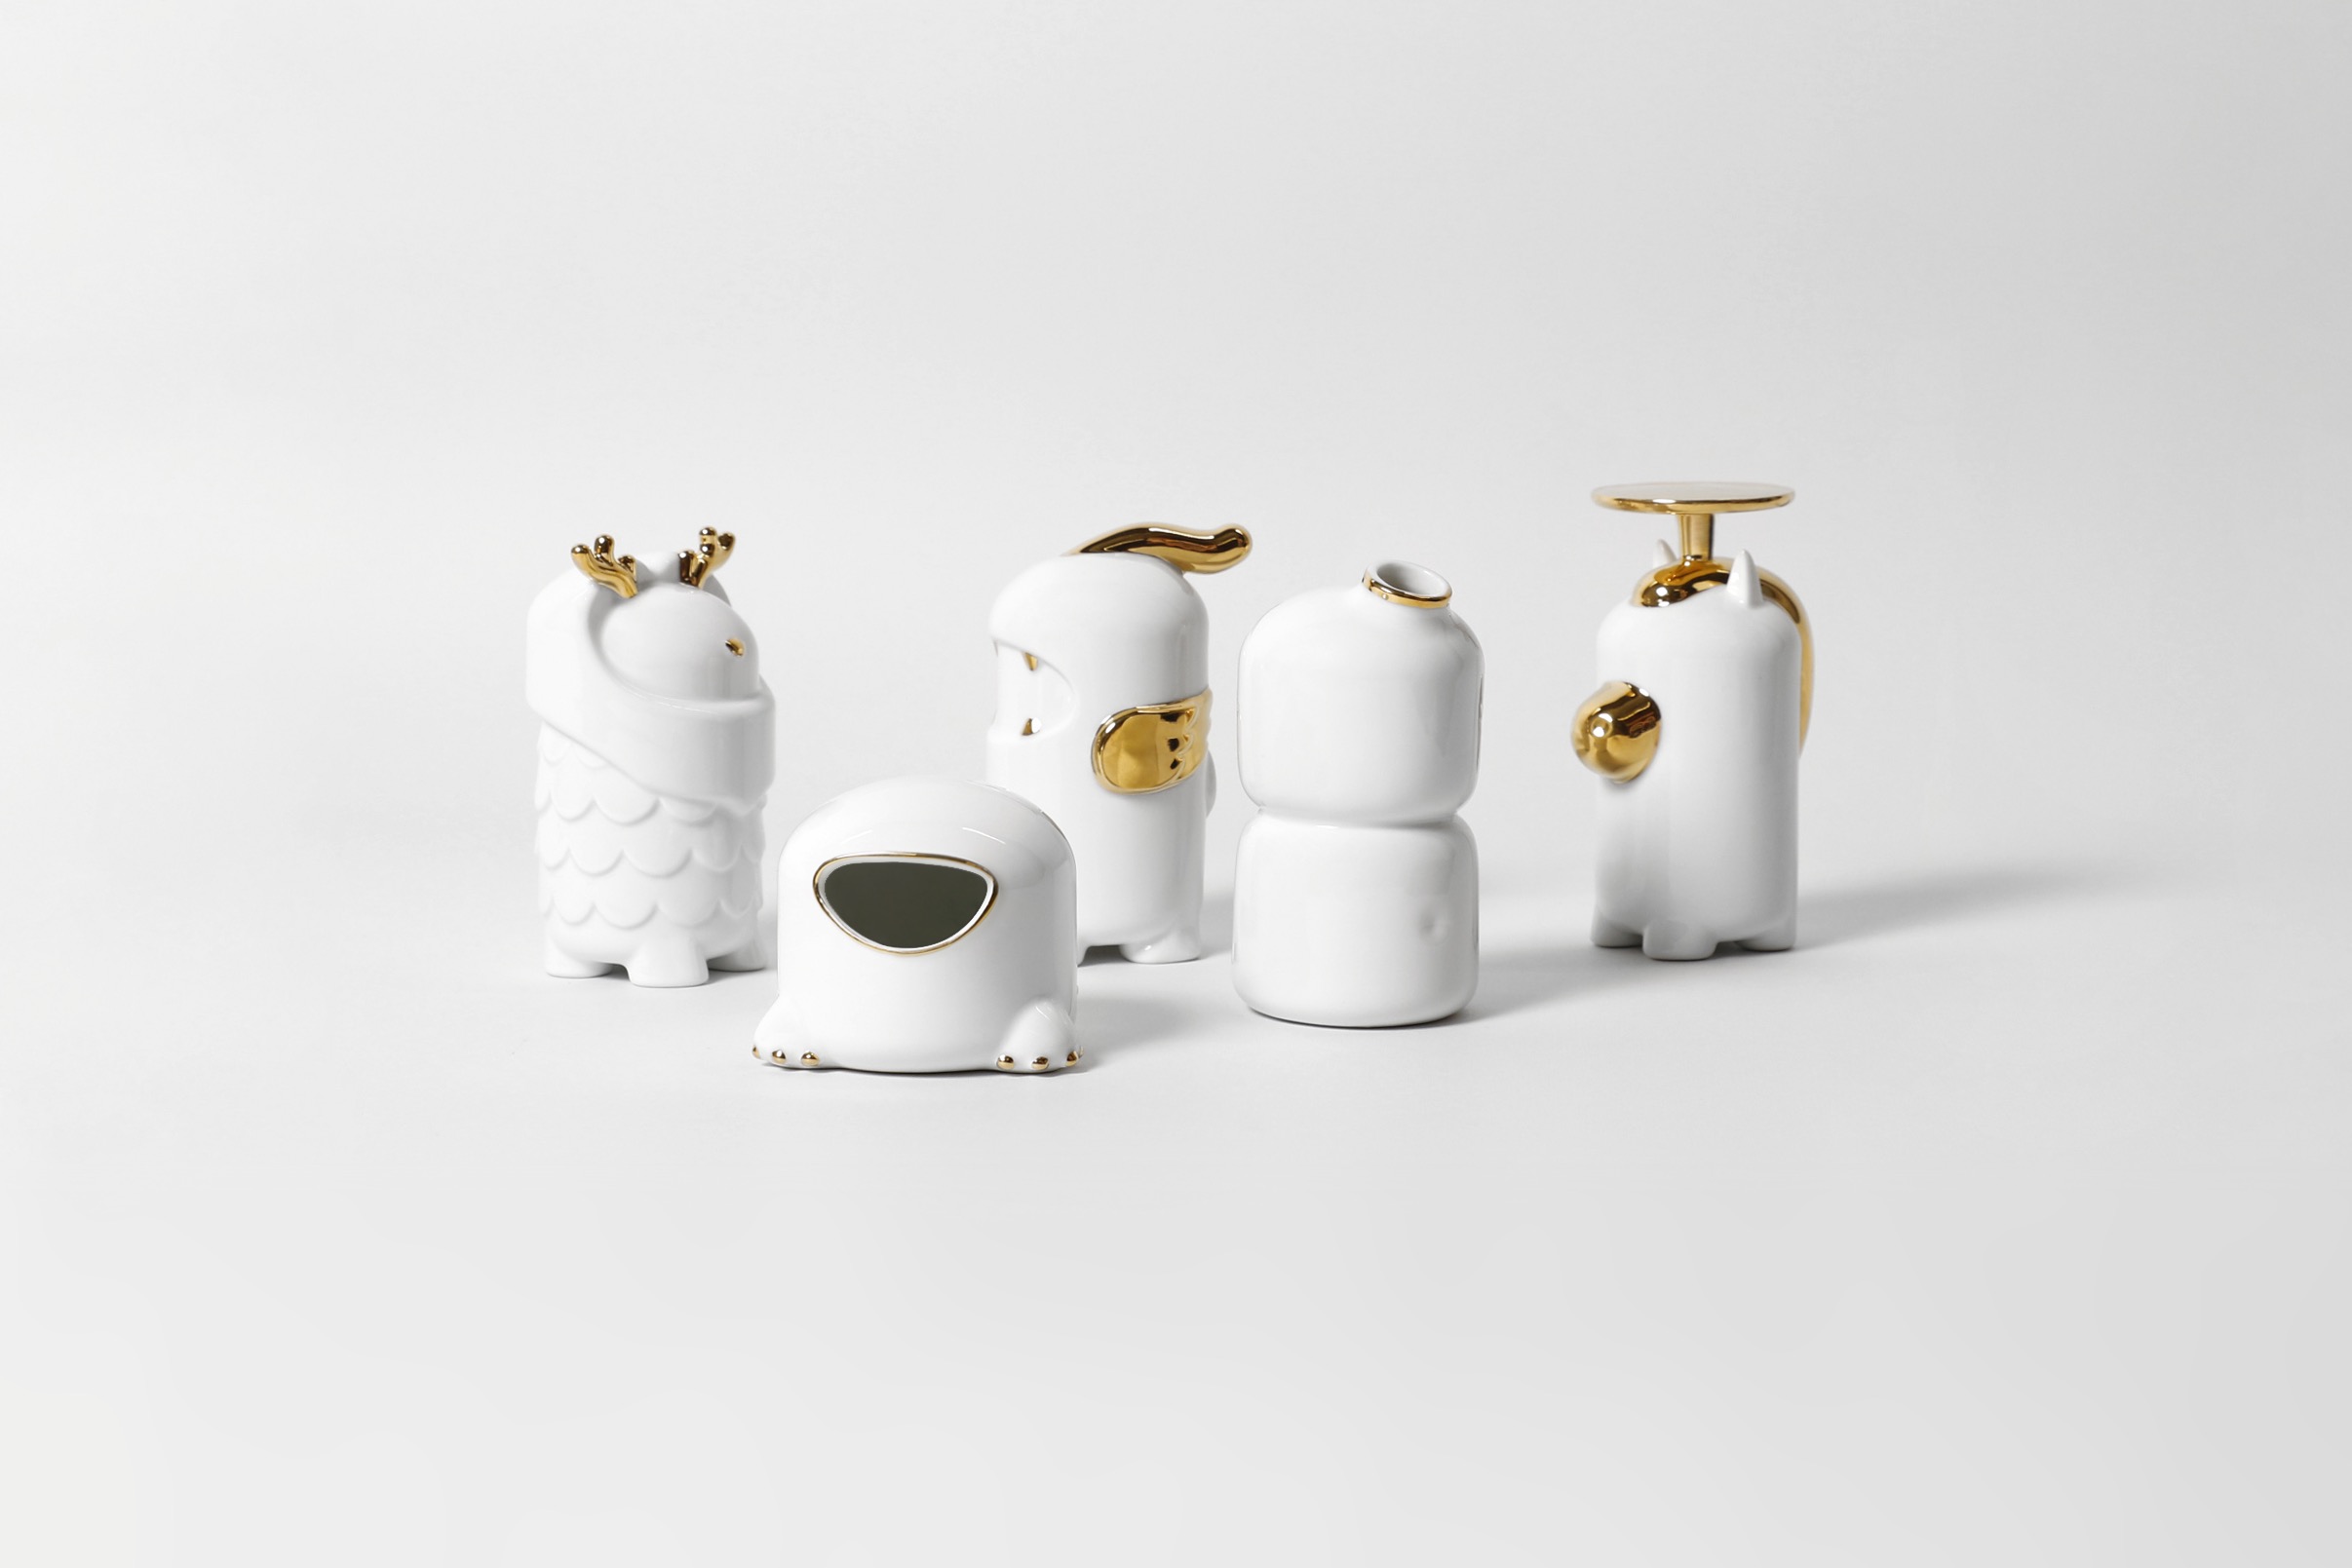 Alumna Lin Qiuxia’s handcrafted porcelain set, inspired by fengshui, is made for retail.